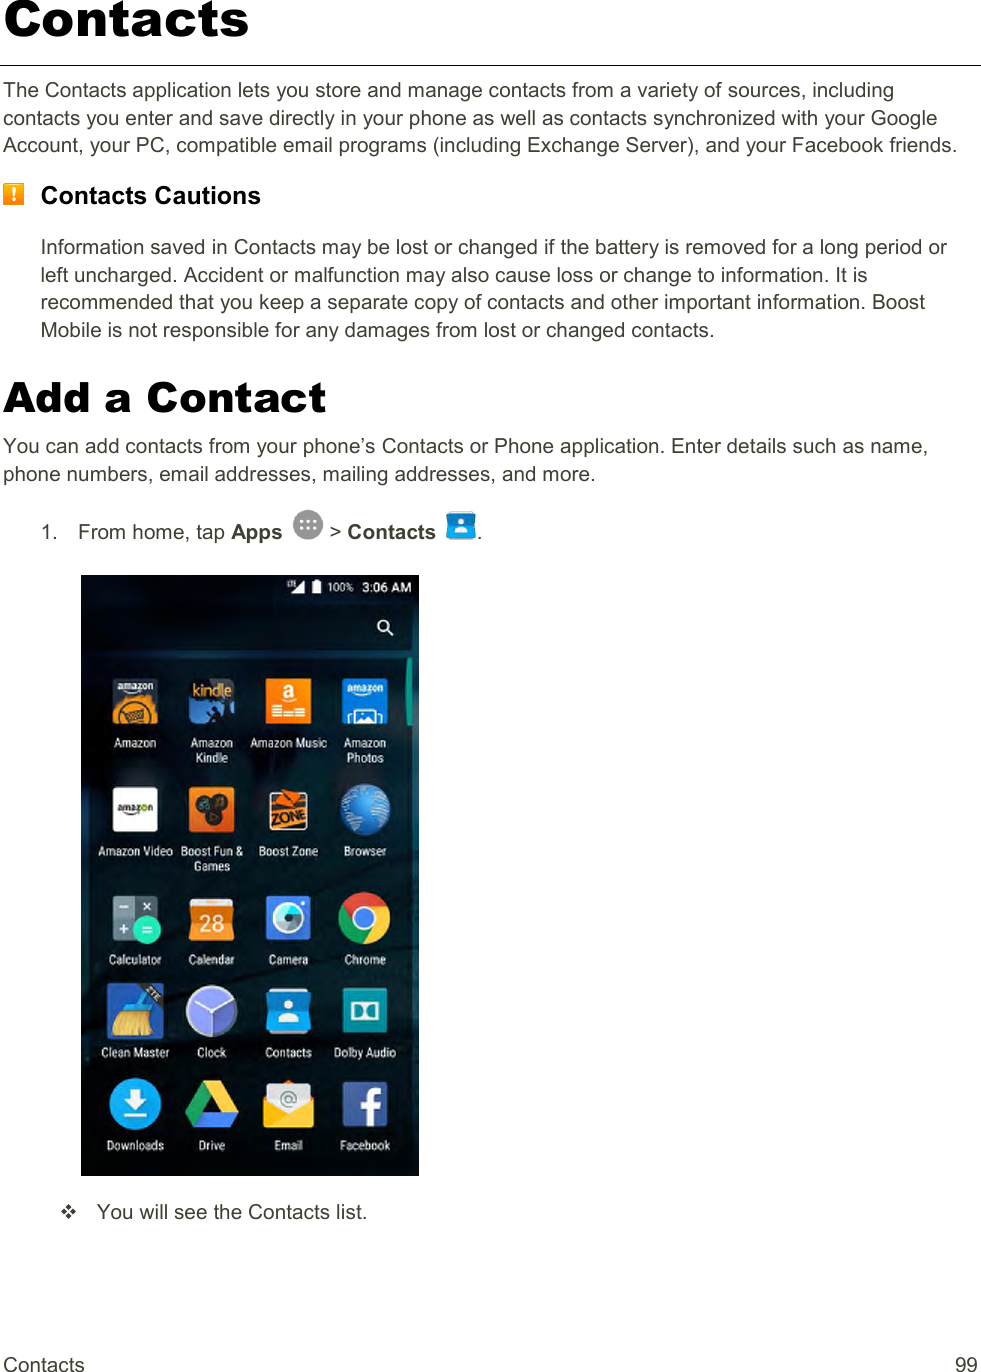 Contacts  99 Contacts The Contacts application lets you store and manage contacts from a variety of sources, including contacts you enter and save directly in your phone as well as contacts synchronized with your Google Account, your PC, compatible email programs (including Exchange Server), and your Facebook friends.  Contacts Cautions Information saved in Contacts may be lost or changed if the battery is removed for a long period or left uncharged. Accident or malfunction may also cause loss or change to information. It is recommended that you keep a separate copy of contacts and other important information. Boost Mobile is not responsible for any damages from lost or changed contacts. Add a Contact You can add contacts from your phone’s Contacts or Phone application. Enter details such as name, phone numbers, email addresses, mailing addresses, and more. 1.  From home, tap Apps   &gt; Contacts  .     You will see the Contacts list. 